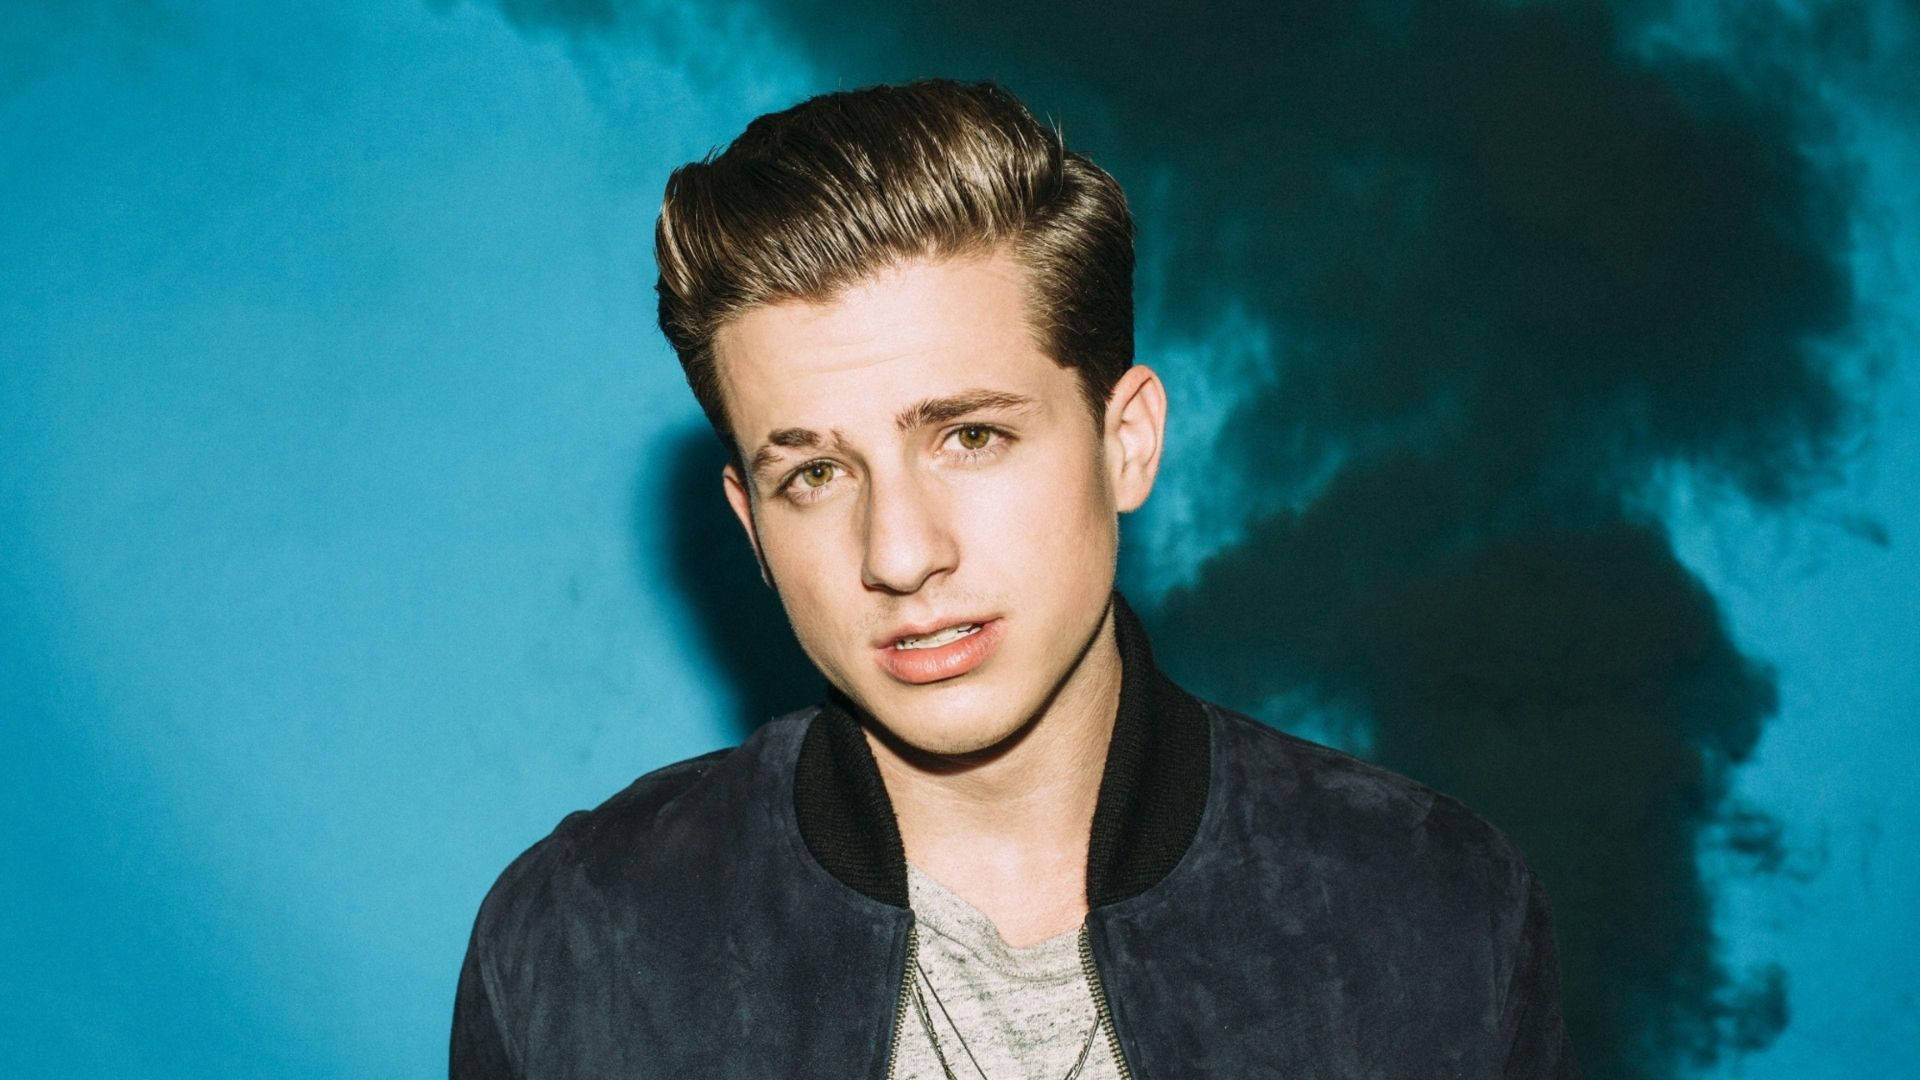 Caption: Exceptional Talent, Charlie Puth In A Misty Backdrop Background